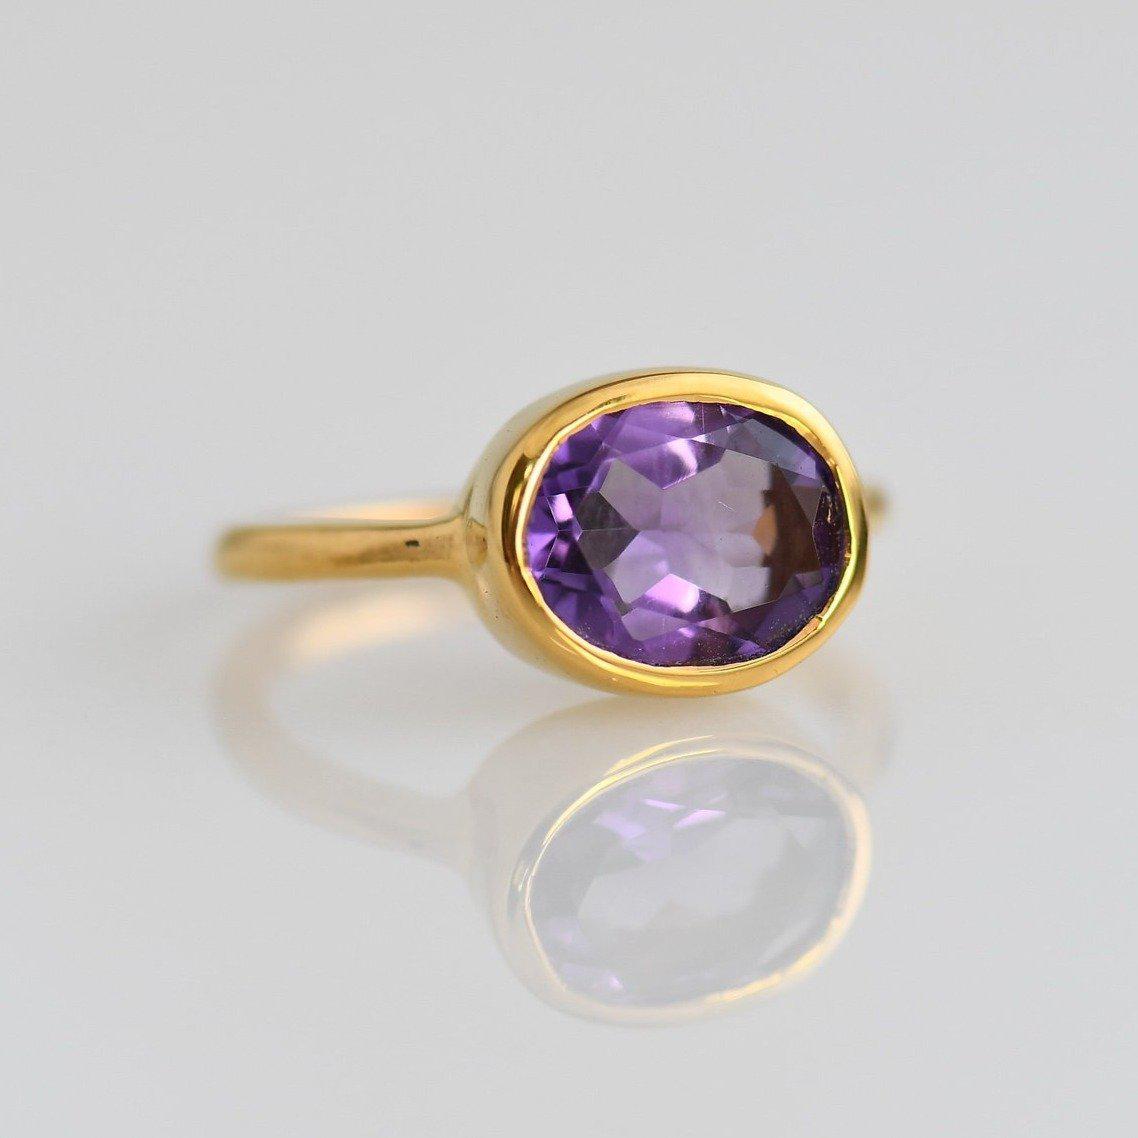 Amethyst Ring - Oval Ring - Bezel set ring - February Birthstone Ring - Gemstone Ring - Stacking Ring - Gold Ring - Bridal jewelry